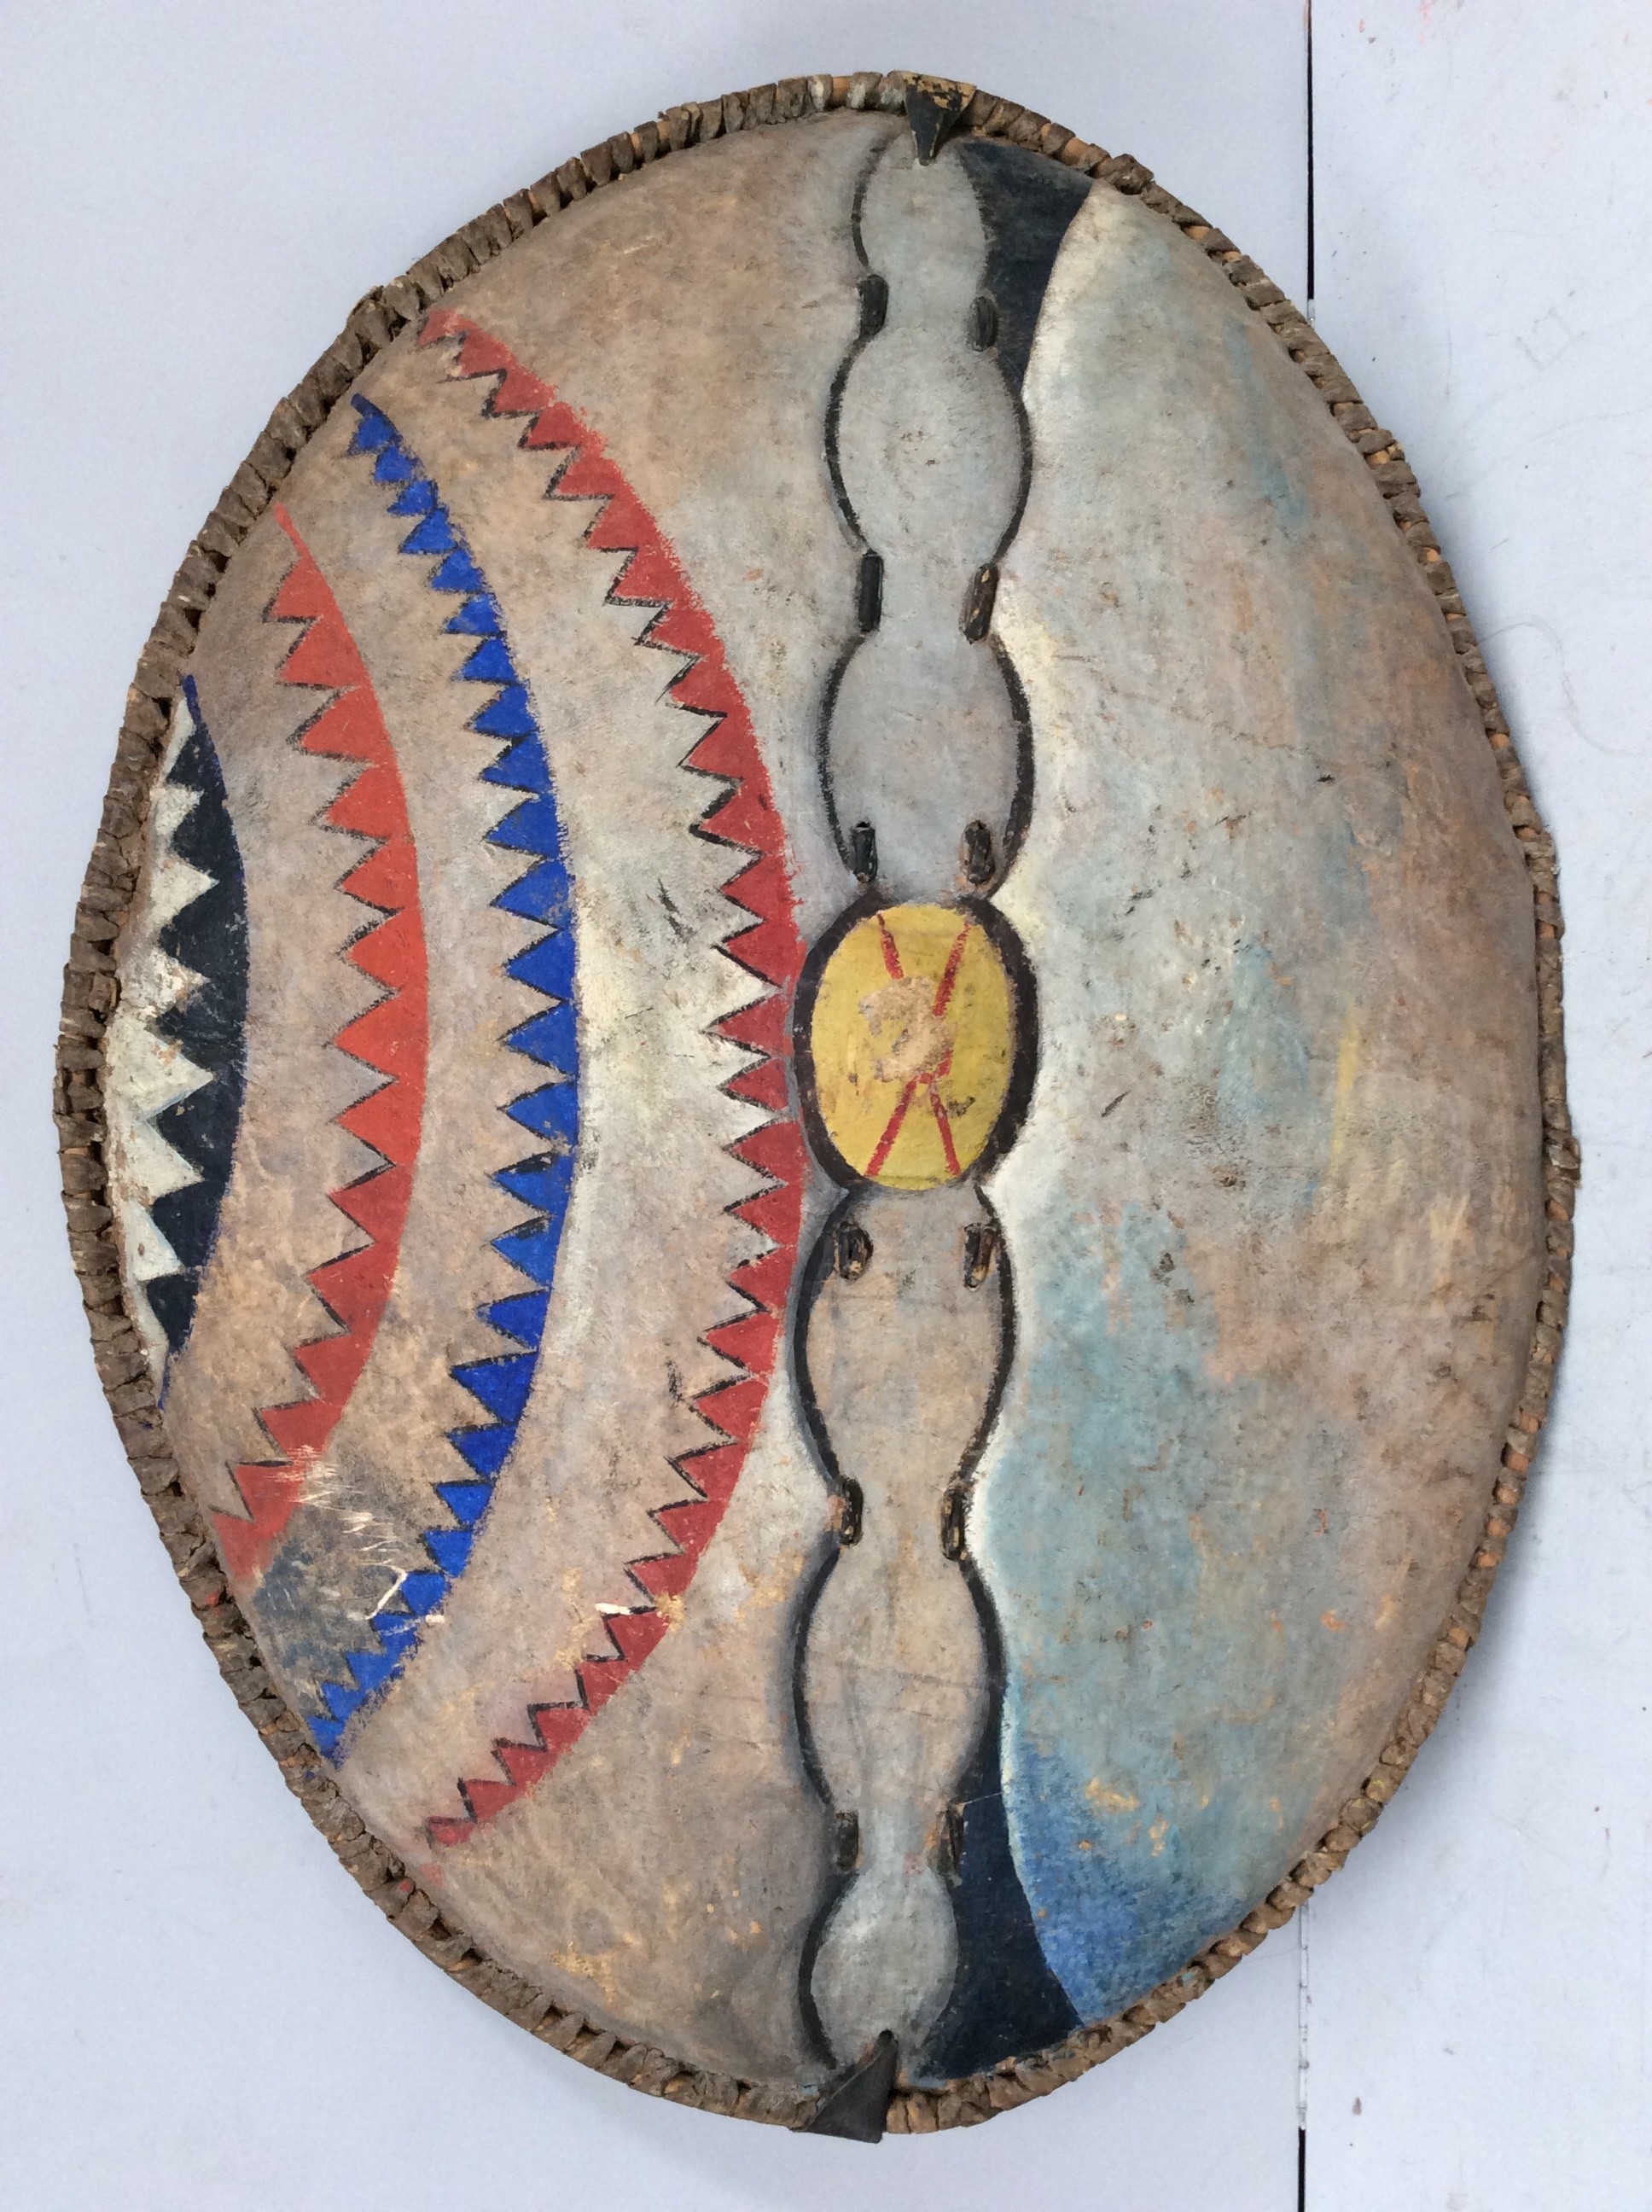 An unusual Maasai shield, Kenya, hide with painted with red, white, blue, black and yellow geometric